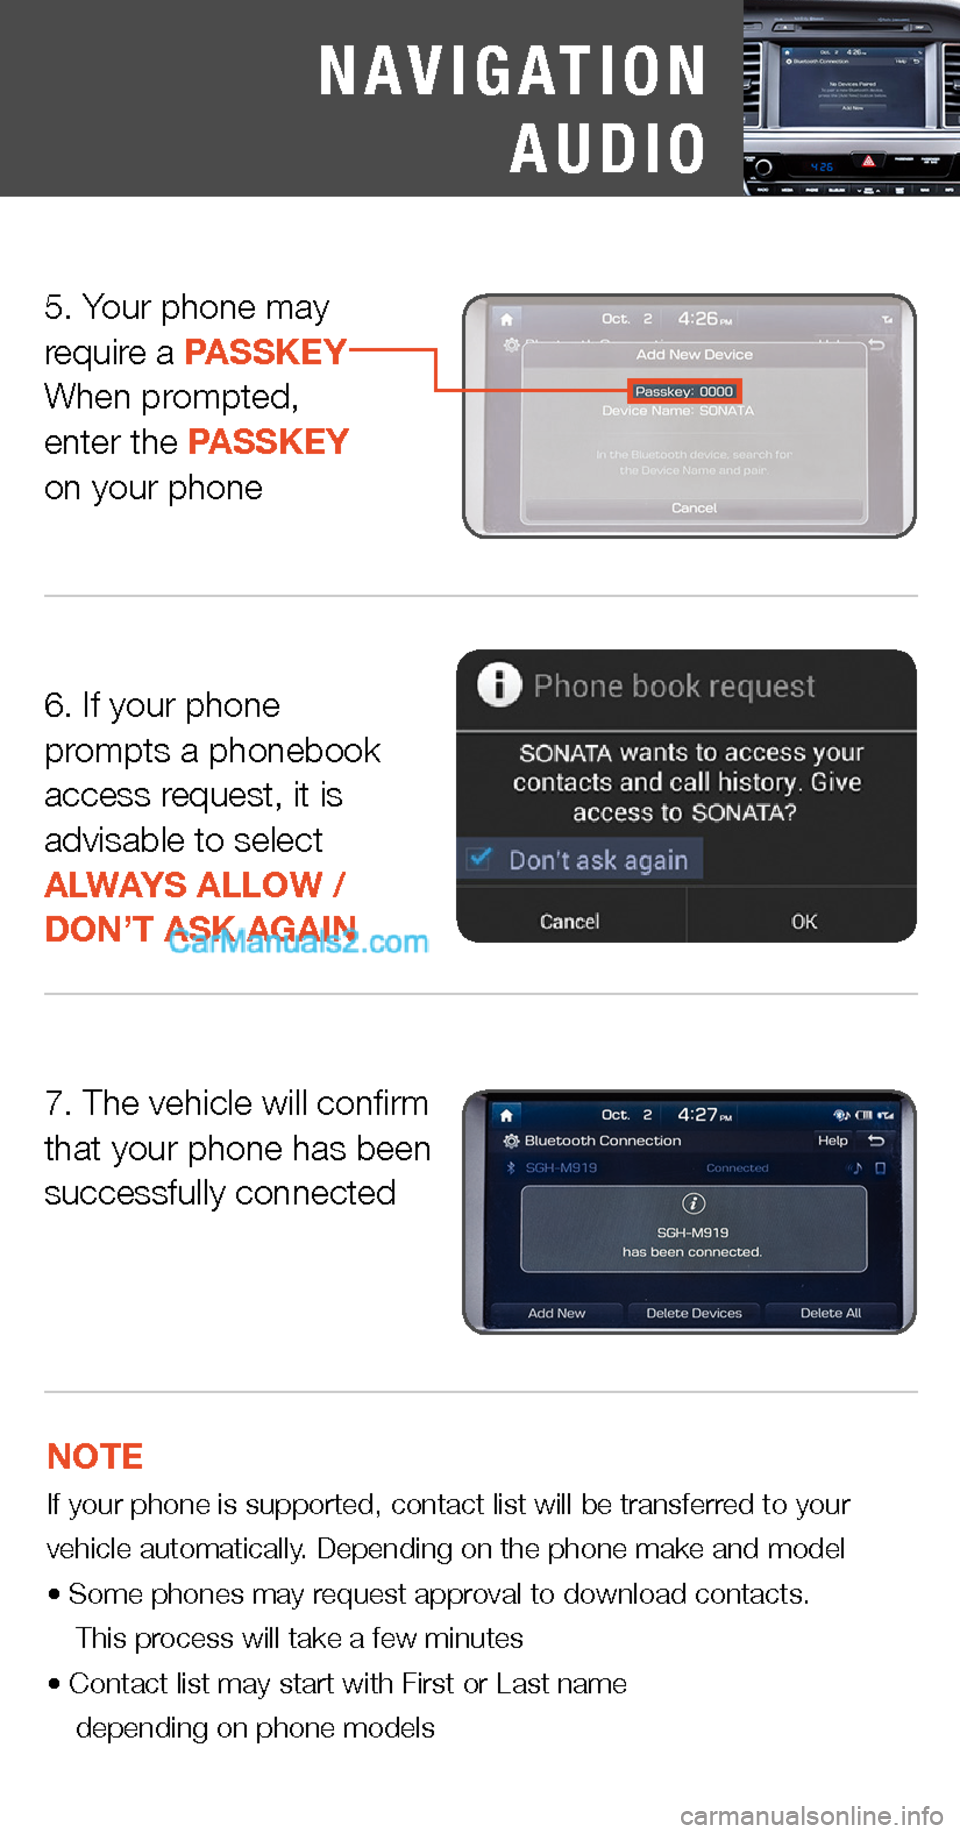 Hyundai Sonata 2015  Quick Tips 7. The vehicle will confirmthat your phone has been successfully connected
NOTE  If your phone is supported, contact list will be transferred to your vehicle automatically. Depending on the phone make